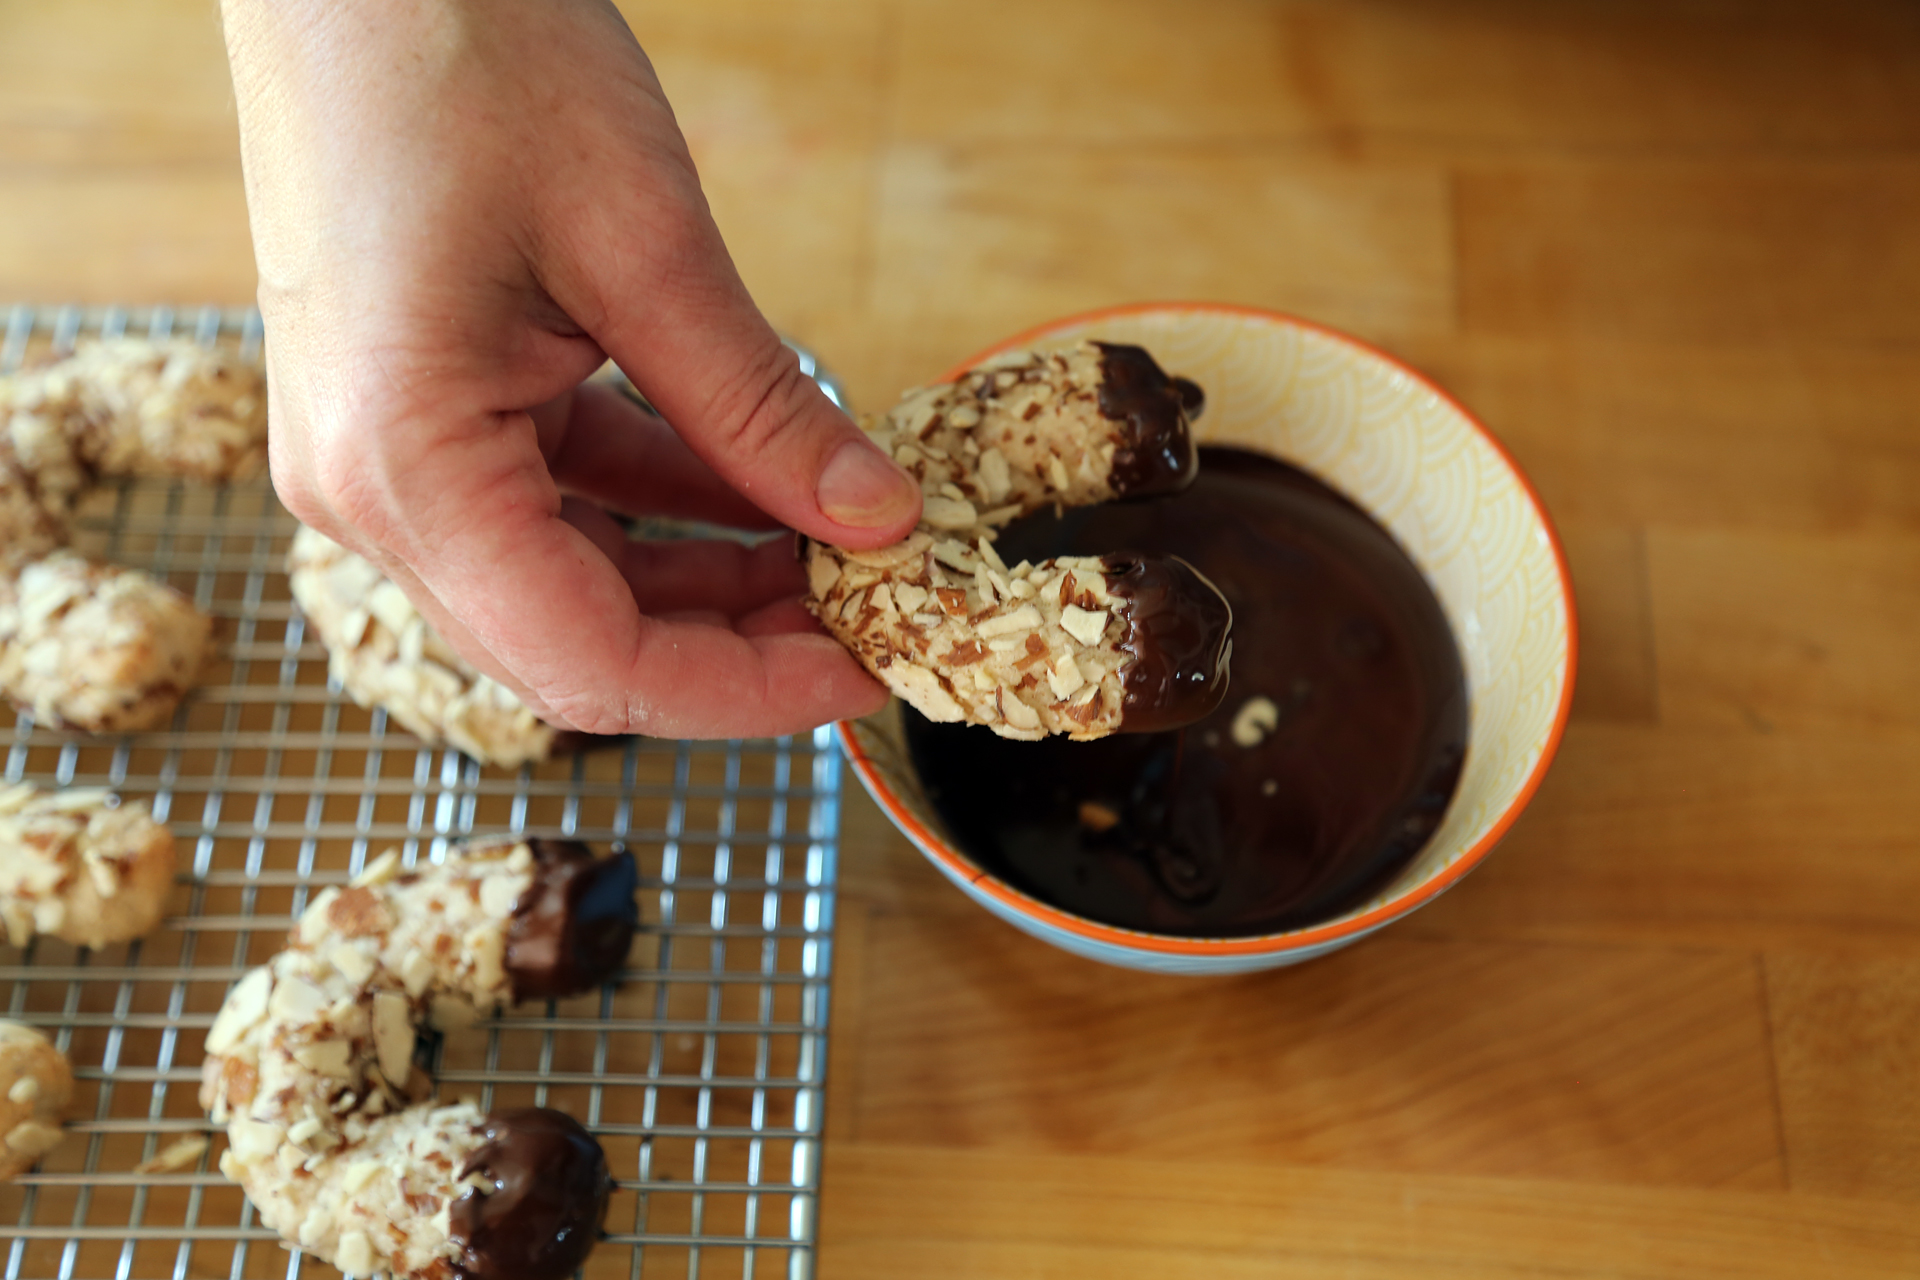 Get fancy and dip the almond crescents in chocolate.